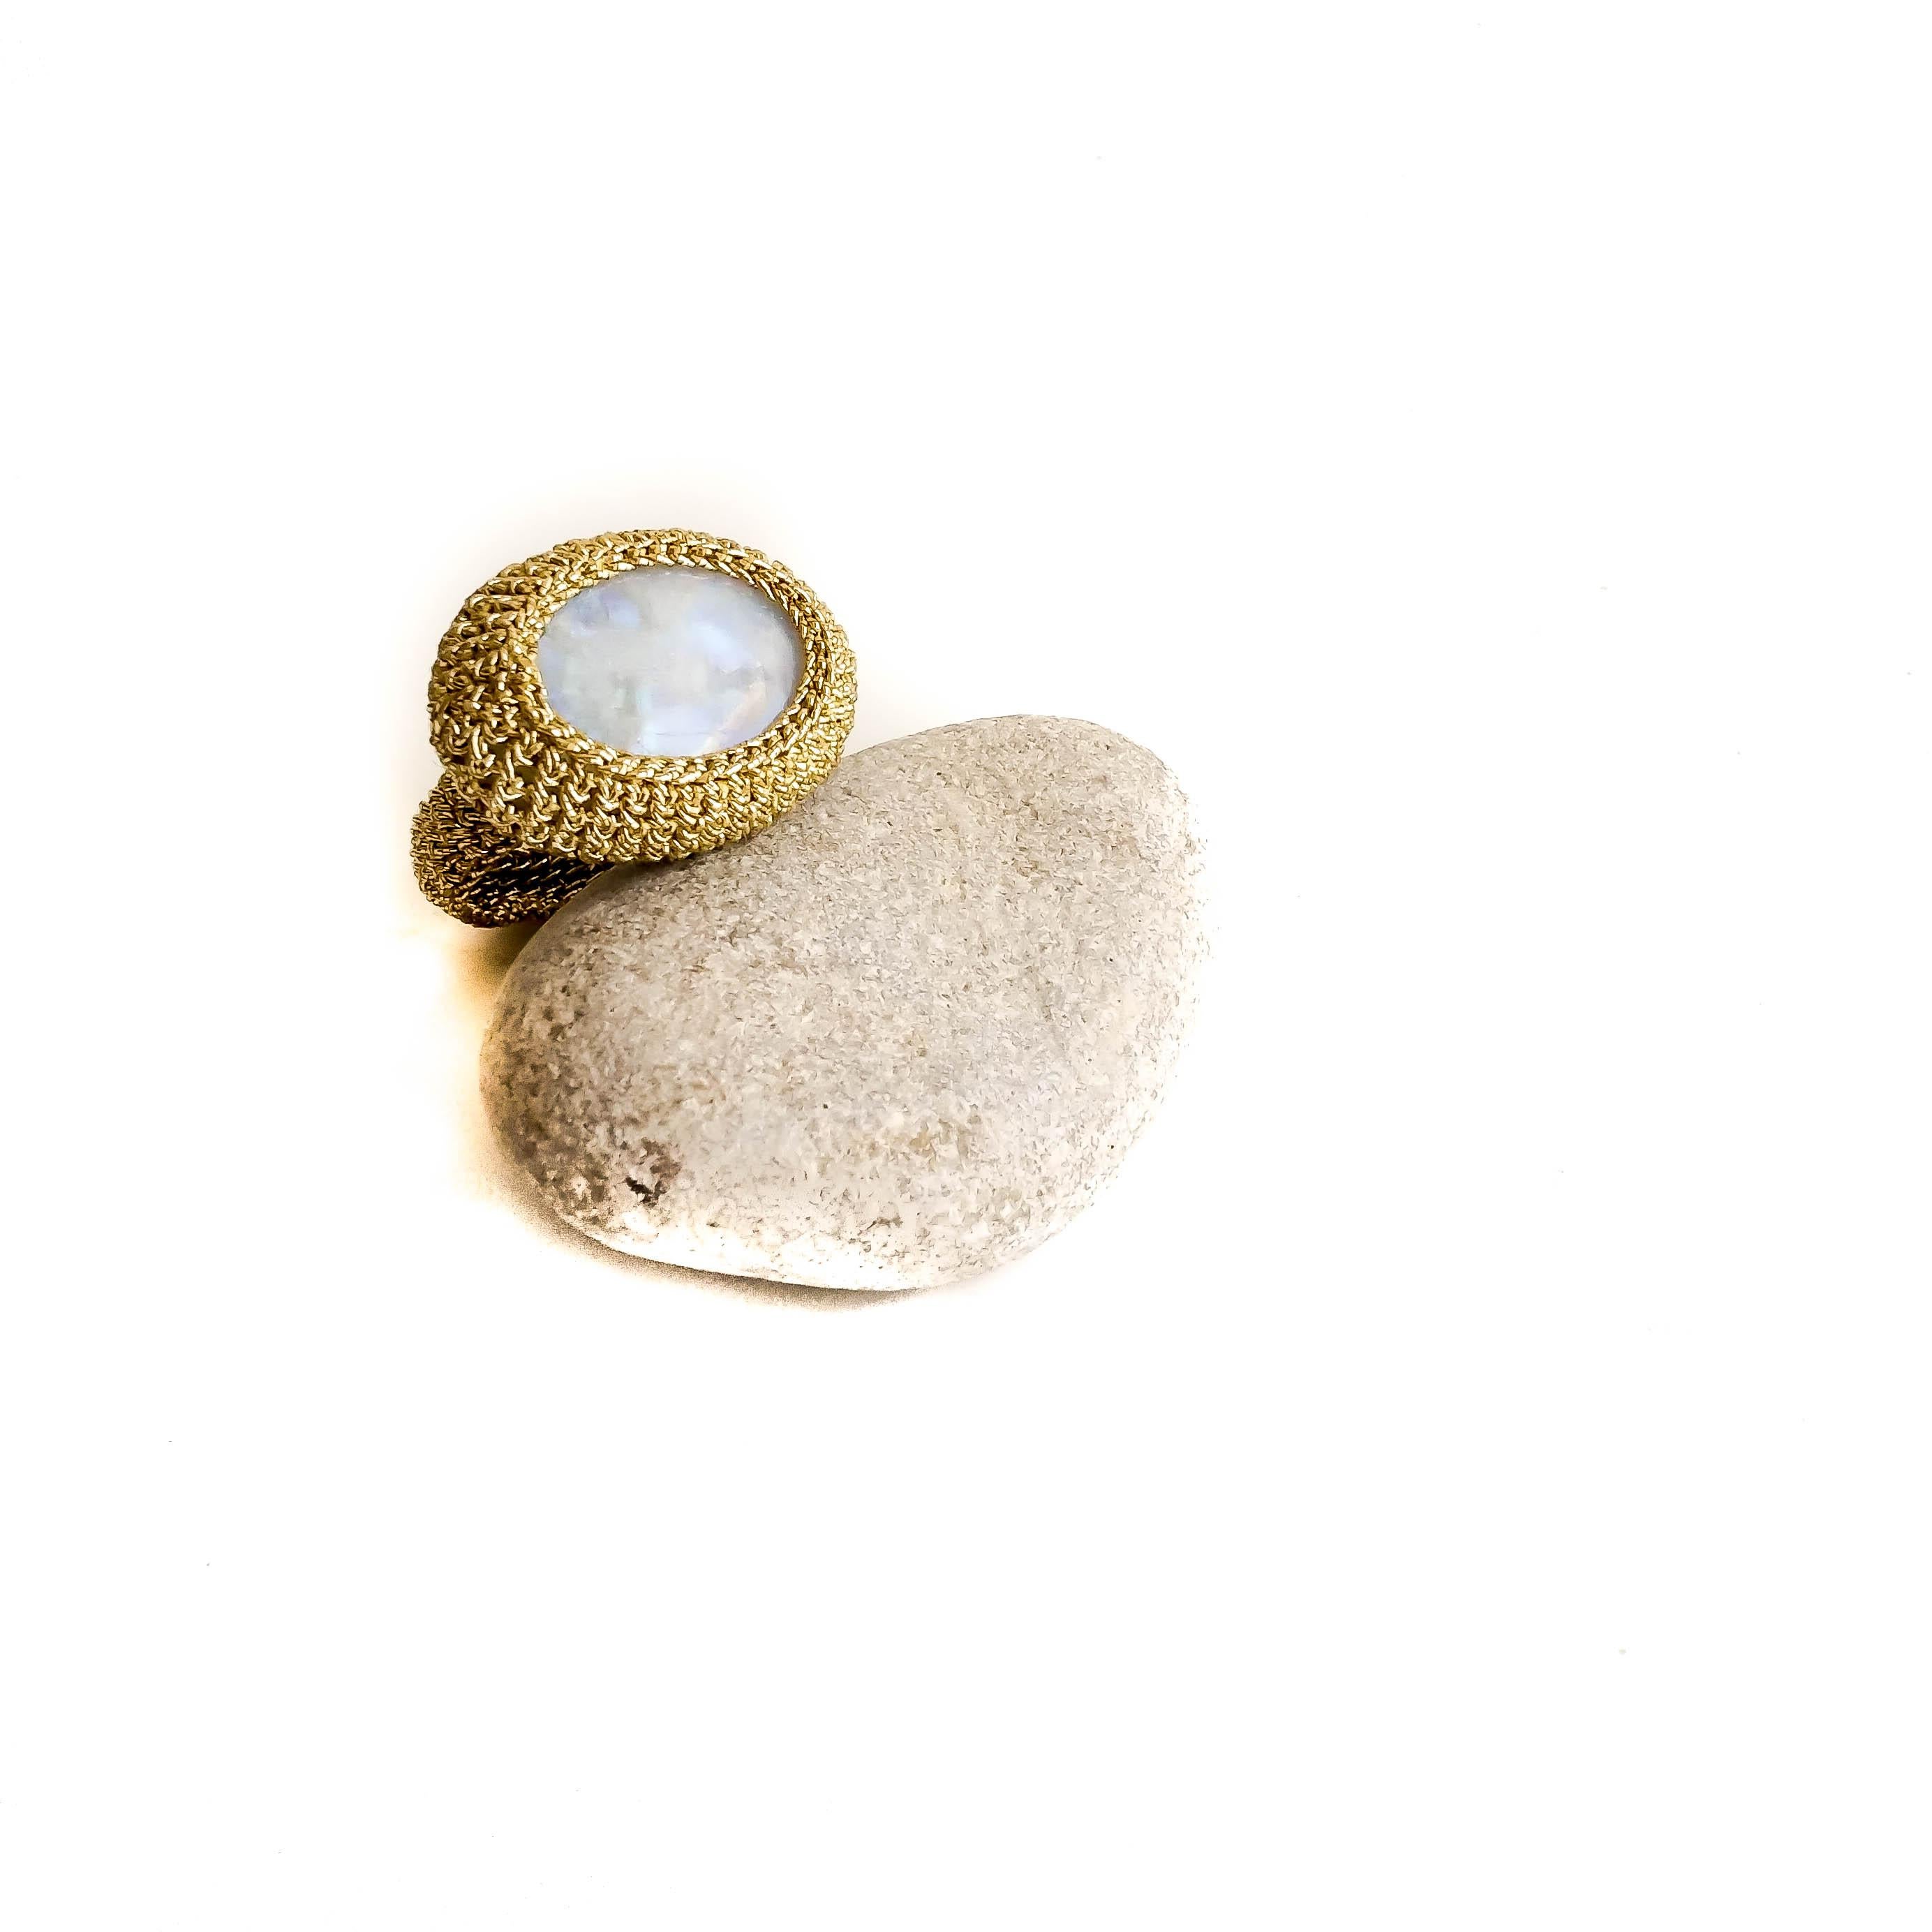 This ring is a real eye catcher. 18 Karat gold thread tightly crochet around a beautiful Moonstone.

The thread is 18 Karat gold. It is pure 18 Karat gold wire, flattend and wrapped around a cotton core. Moonstone holds the power of mystery. Pearly